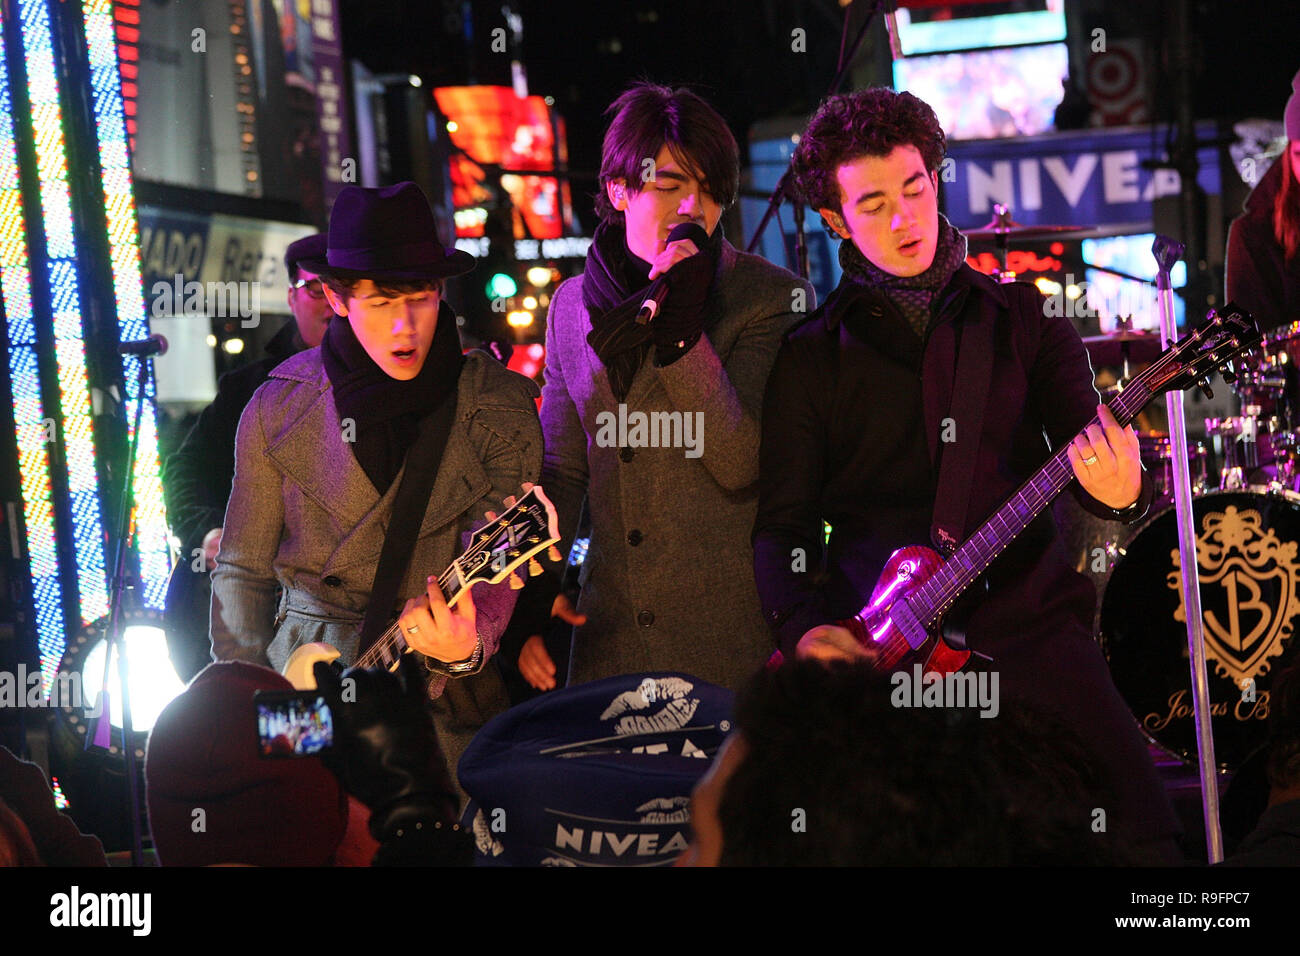 NEW YORK - DECEMBER 31:  Joe Jonas and Kevin Jonas gf the Jonas Brothers perform on stage at the ceremony to lower the New Years Eve ball in Times Square on December 31, 2008 in New York City.  (Photo by Steve Mack/S.D. Mack Pictures) Stock Photo